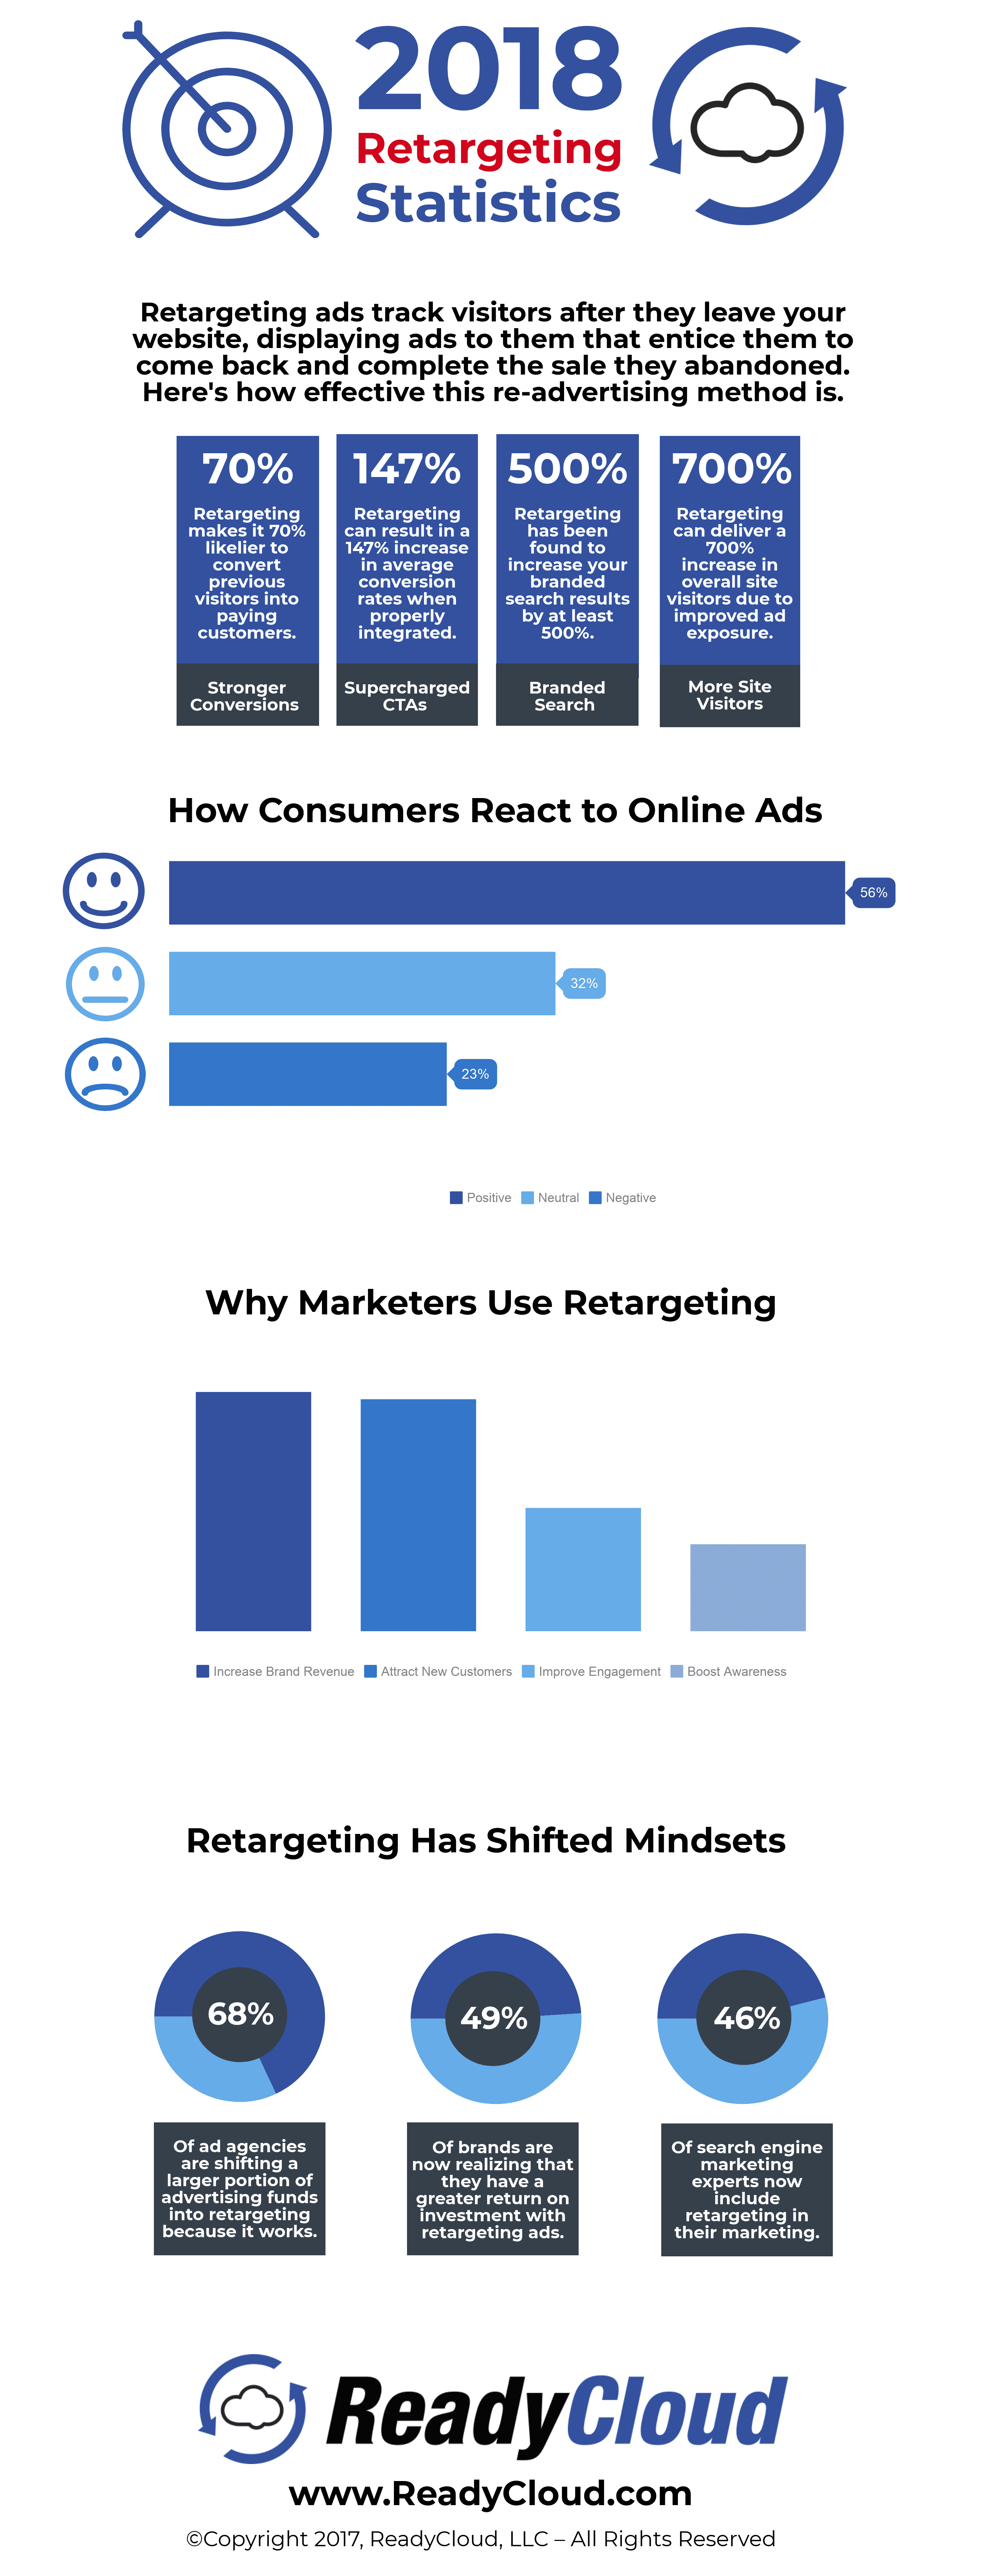 Are you using retargeting for your ecommerce store? If you are not, here are some powerful reasons to consider doing so. 